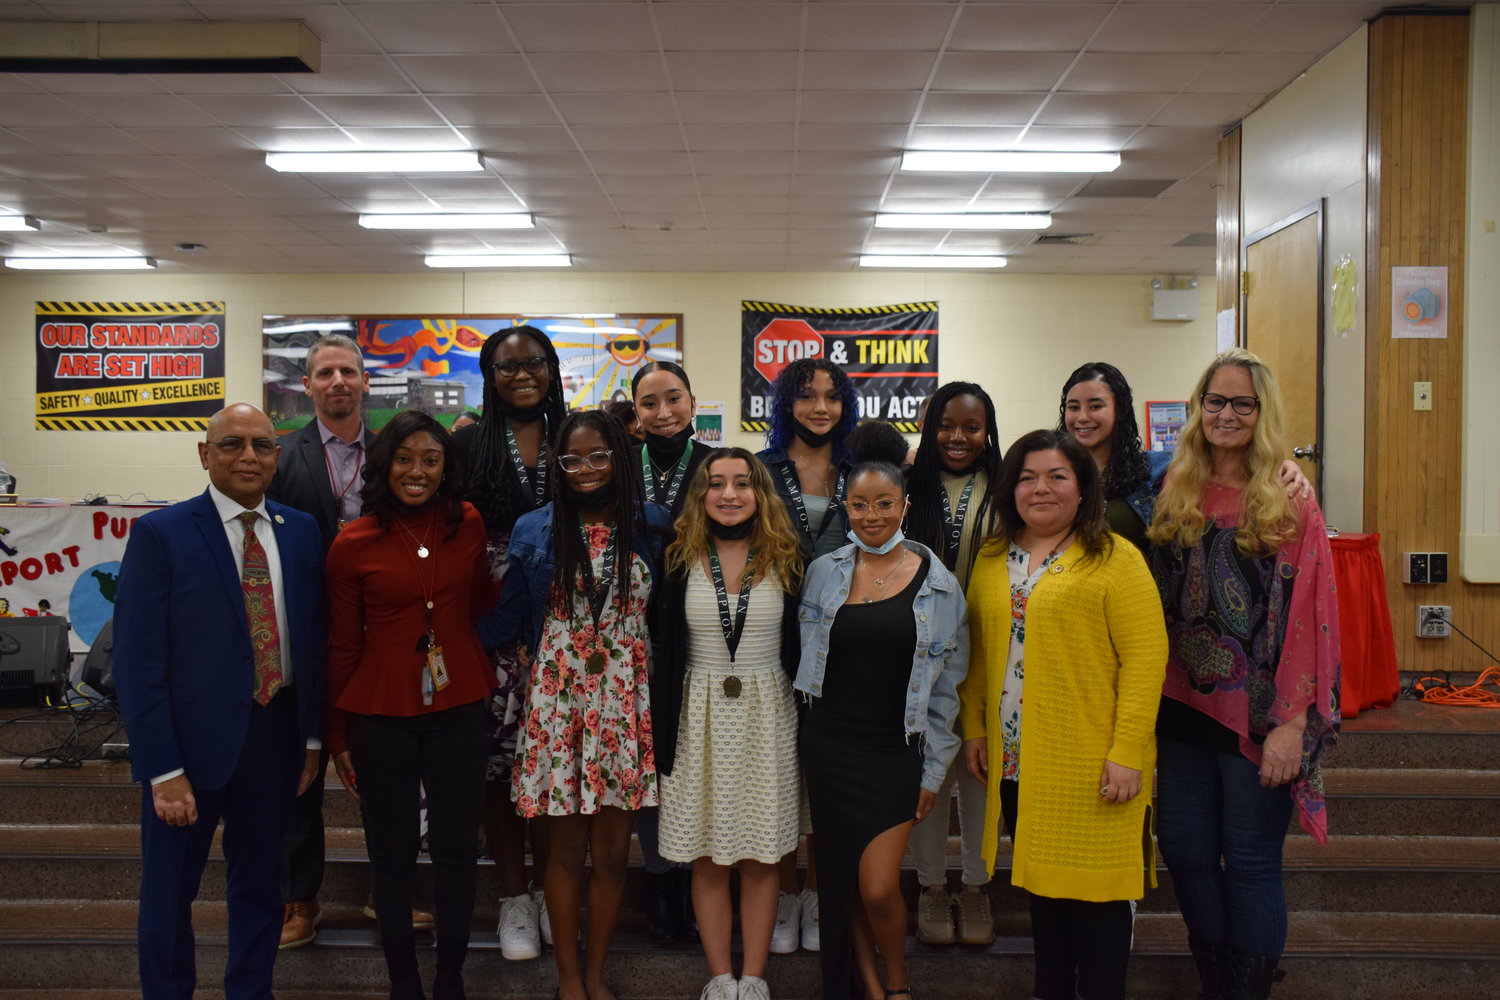 The Freeport Board of Education recognized the varsity cheerleading team, along with coach Laurie Kolodny (right) and assistant coach Erica Groover (second left) at the board of education meeting on March 23.